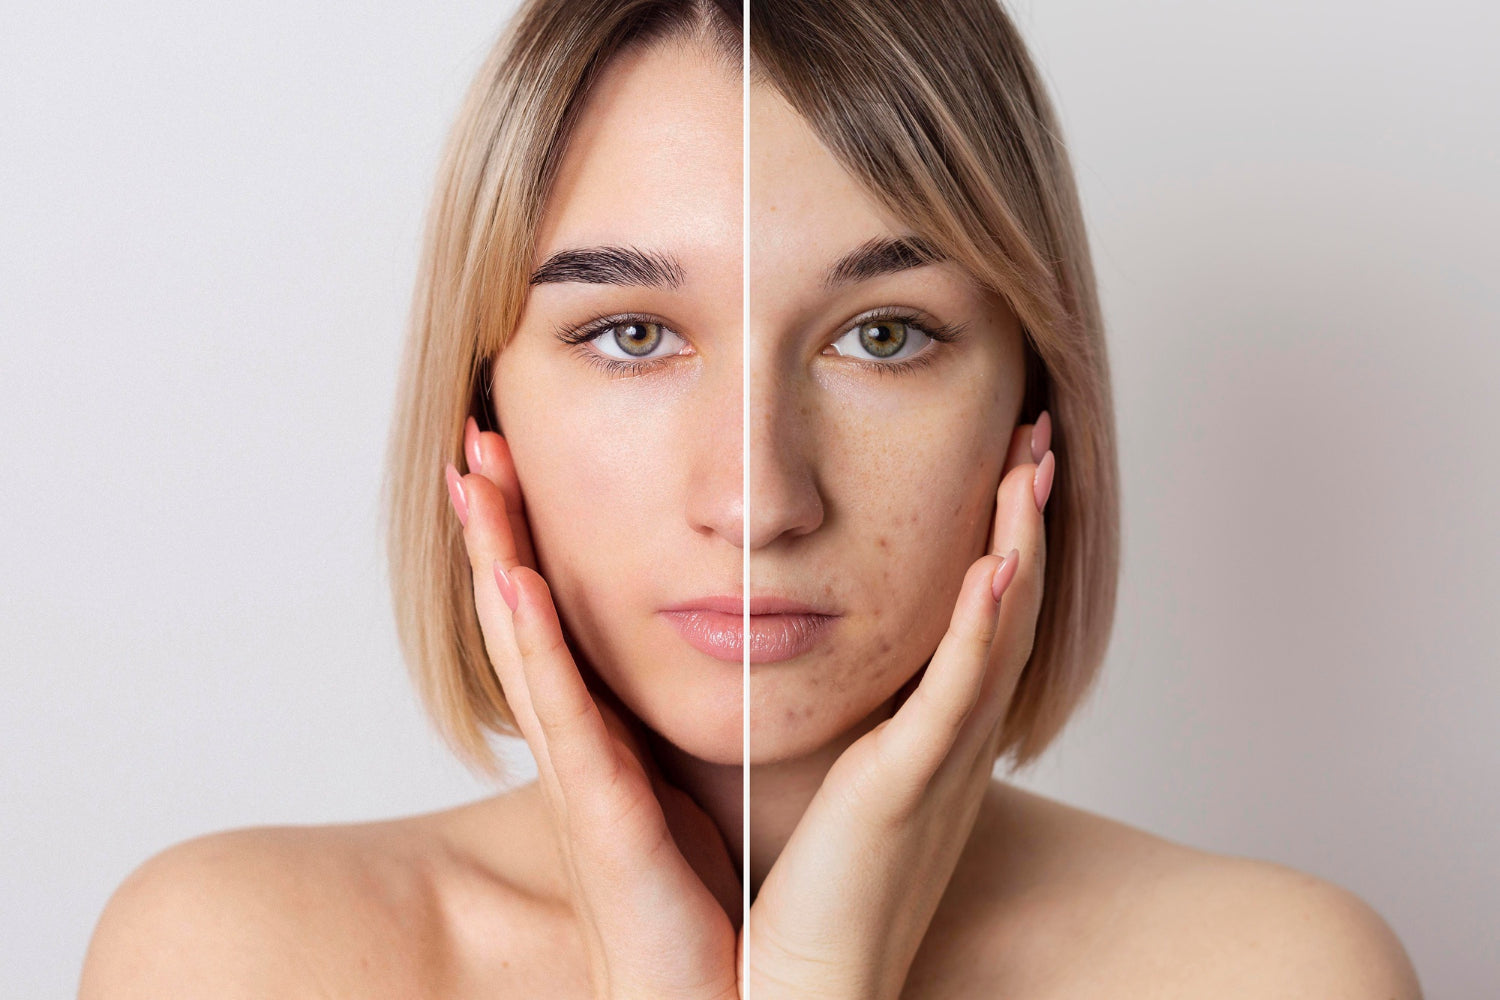 Image by <a href="https://www.freepik.com/free-photo/before-after-portrait-woman-retouched_18962227.htm#query=microneedling&position=9&from_view=search&track=sph">Freepik</a>